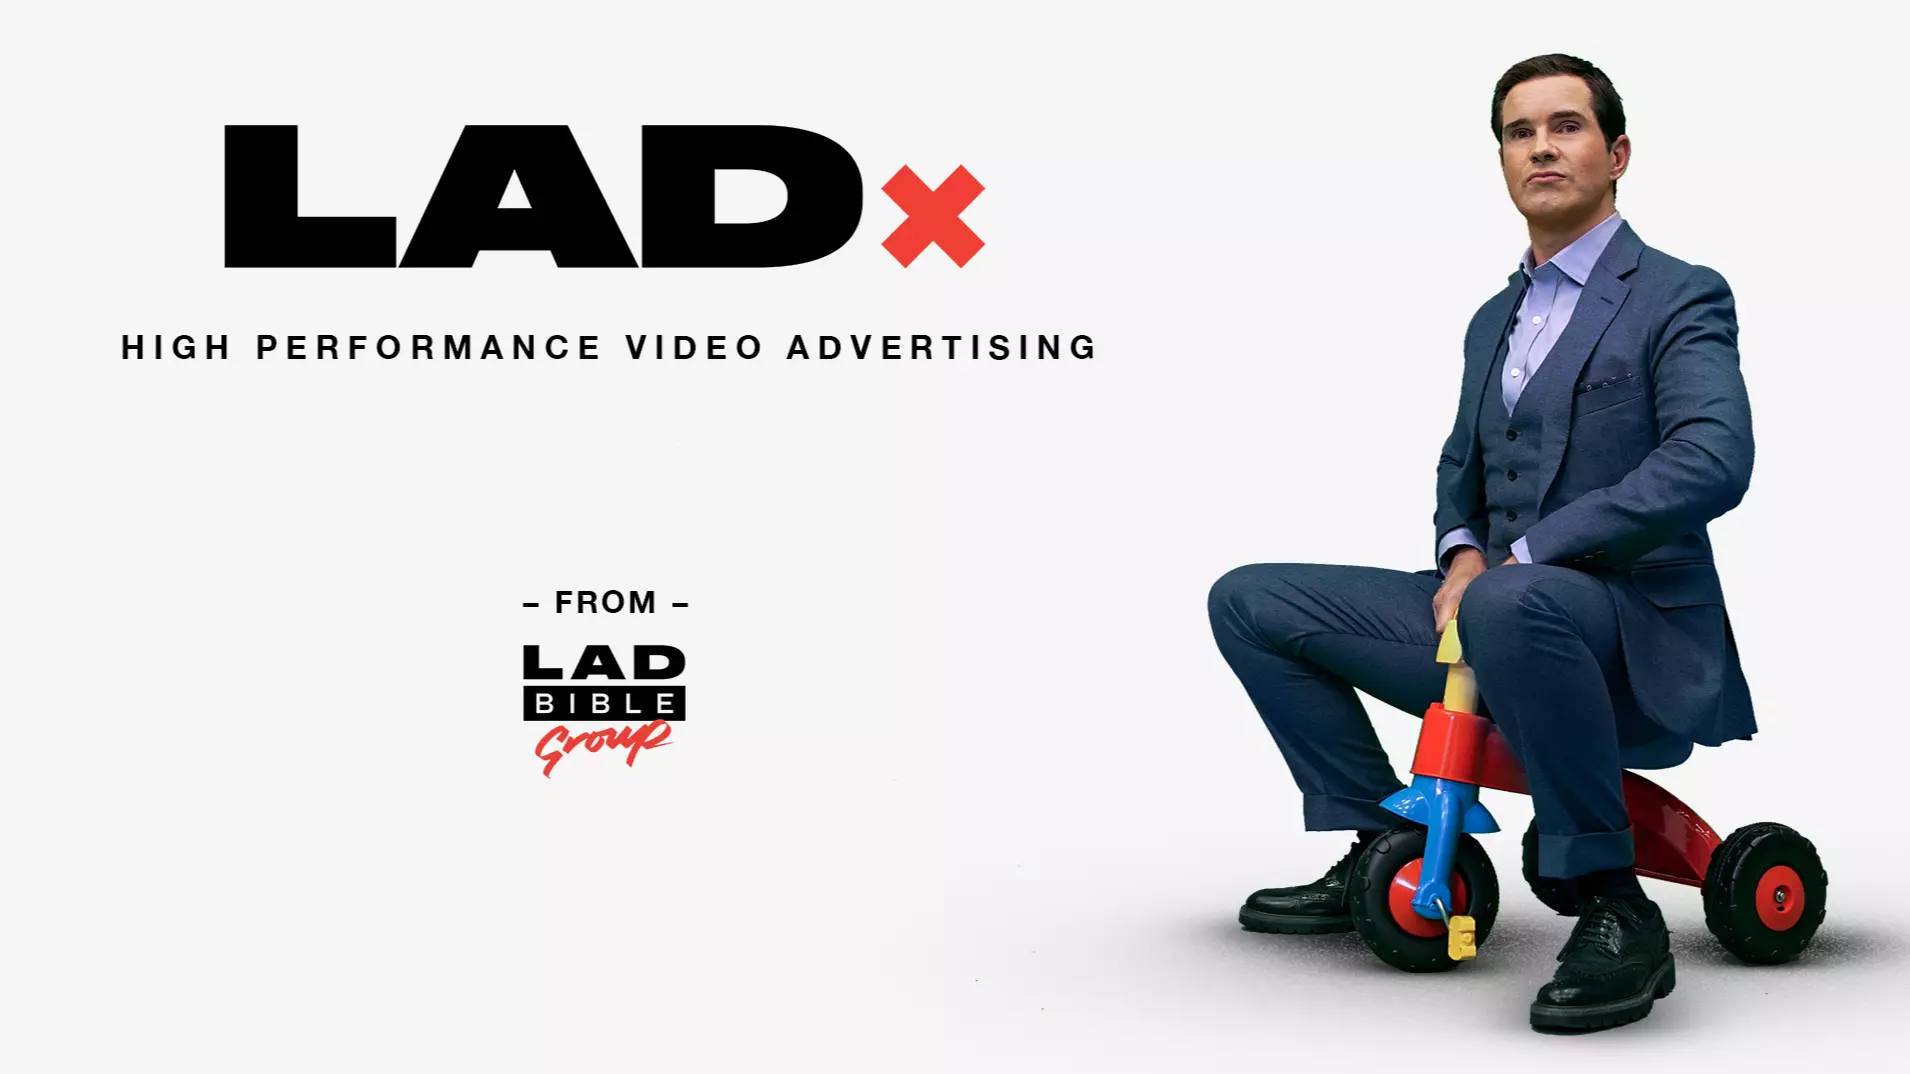 Ladbible Group Calls On Jimmy Carr To Launch New Ladx Display Video Advertising Product